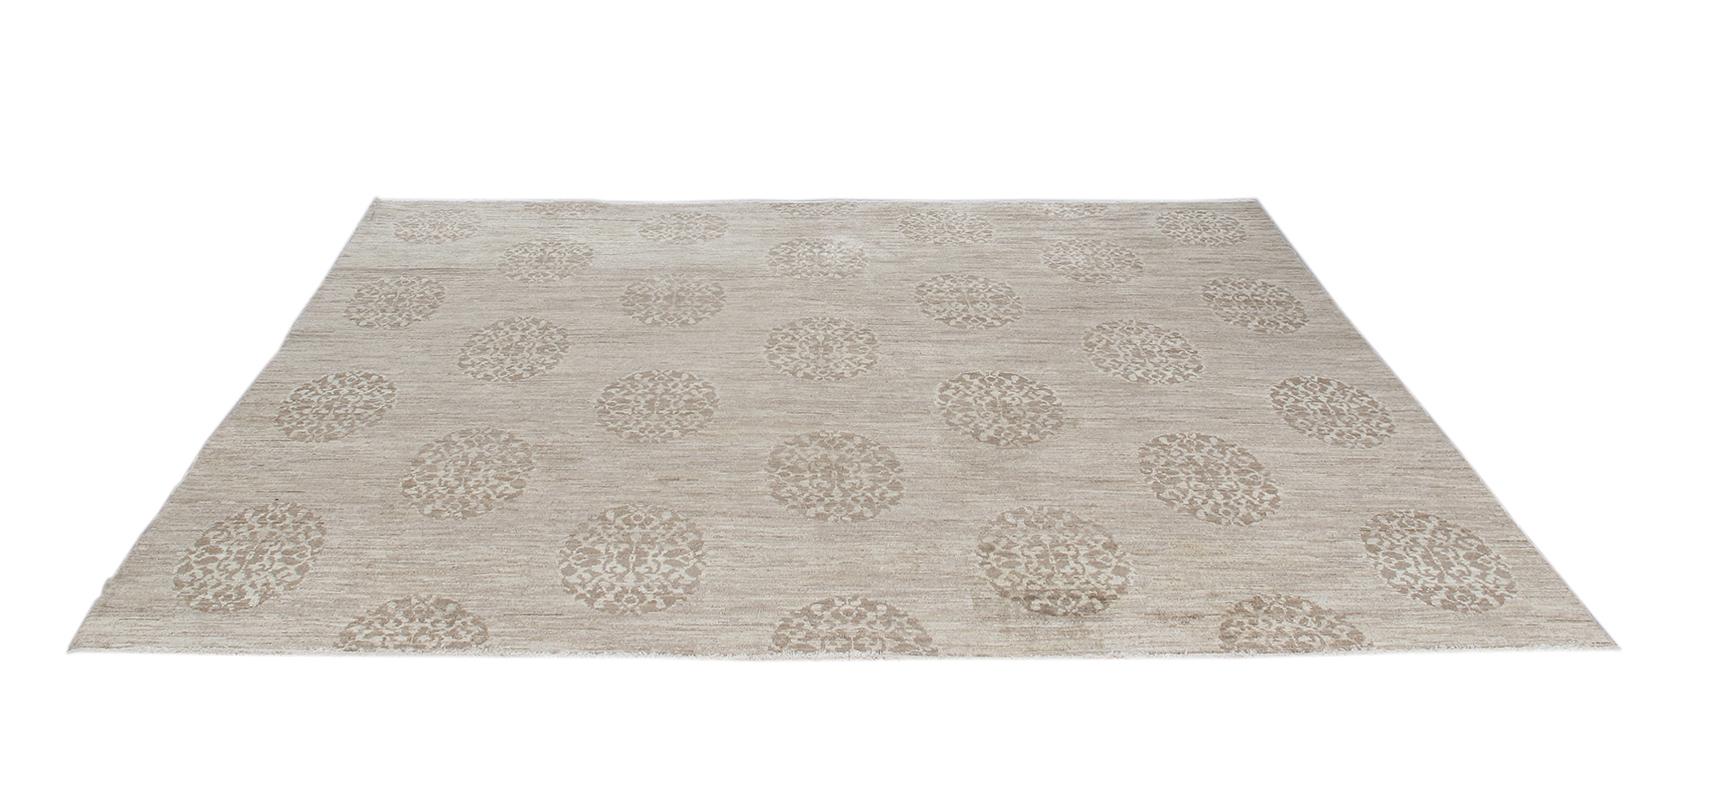 Made in Iran, with the finest hand-carded, hand-spun wool, this hand-knotted rug is designed with a traditional 19th century Tibetan motif by artisan weavers using ancient techniques. Custom sizes and colors available. 
Rug size 8'5